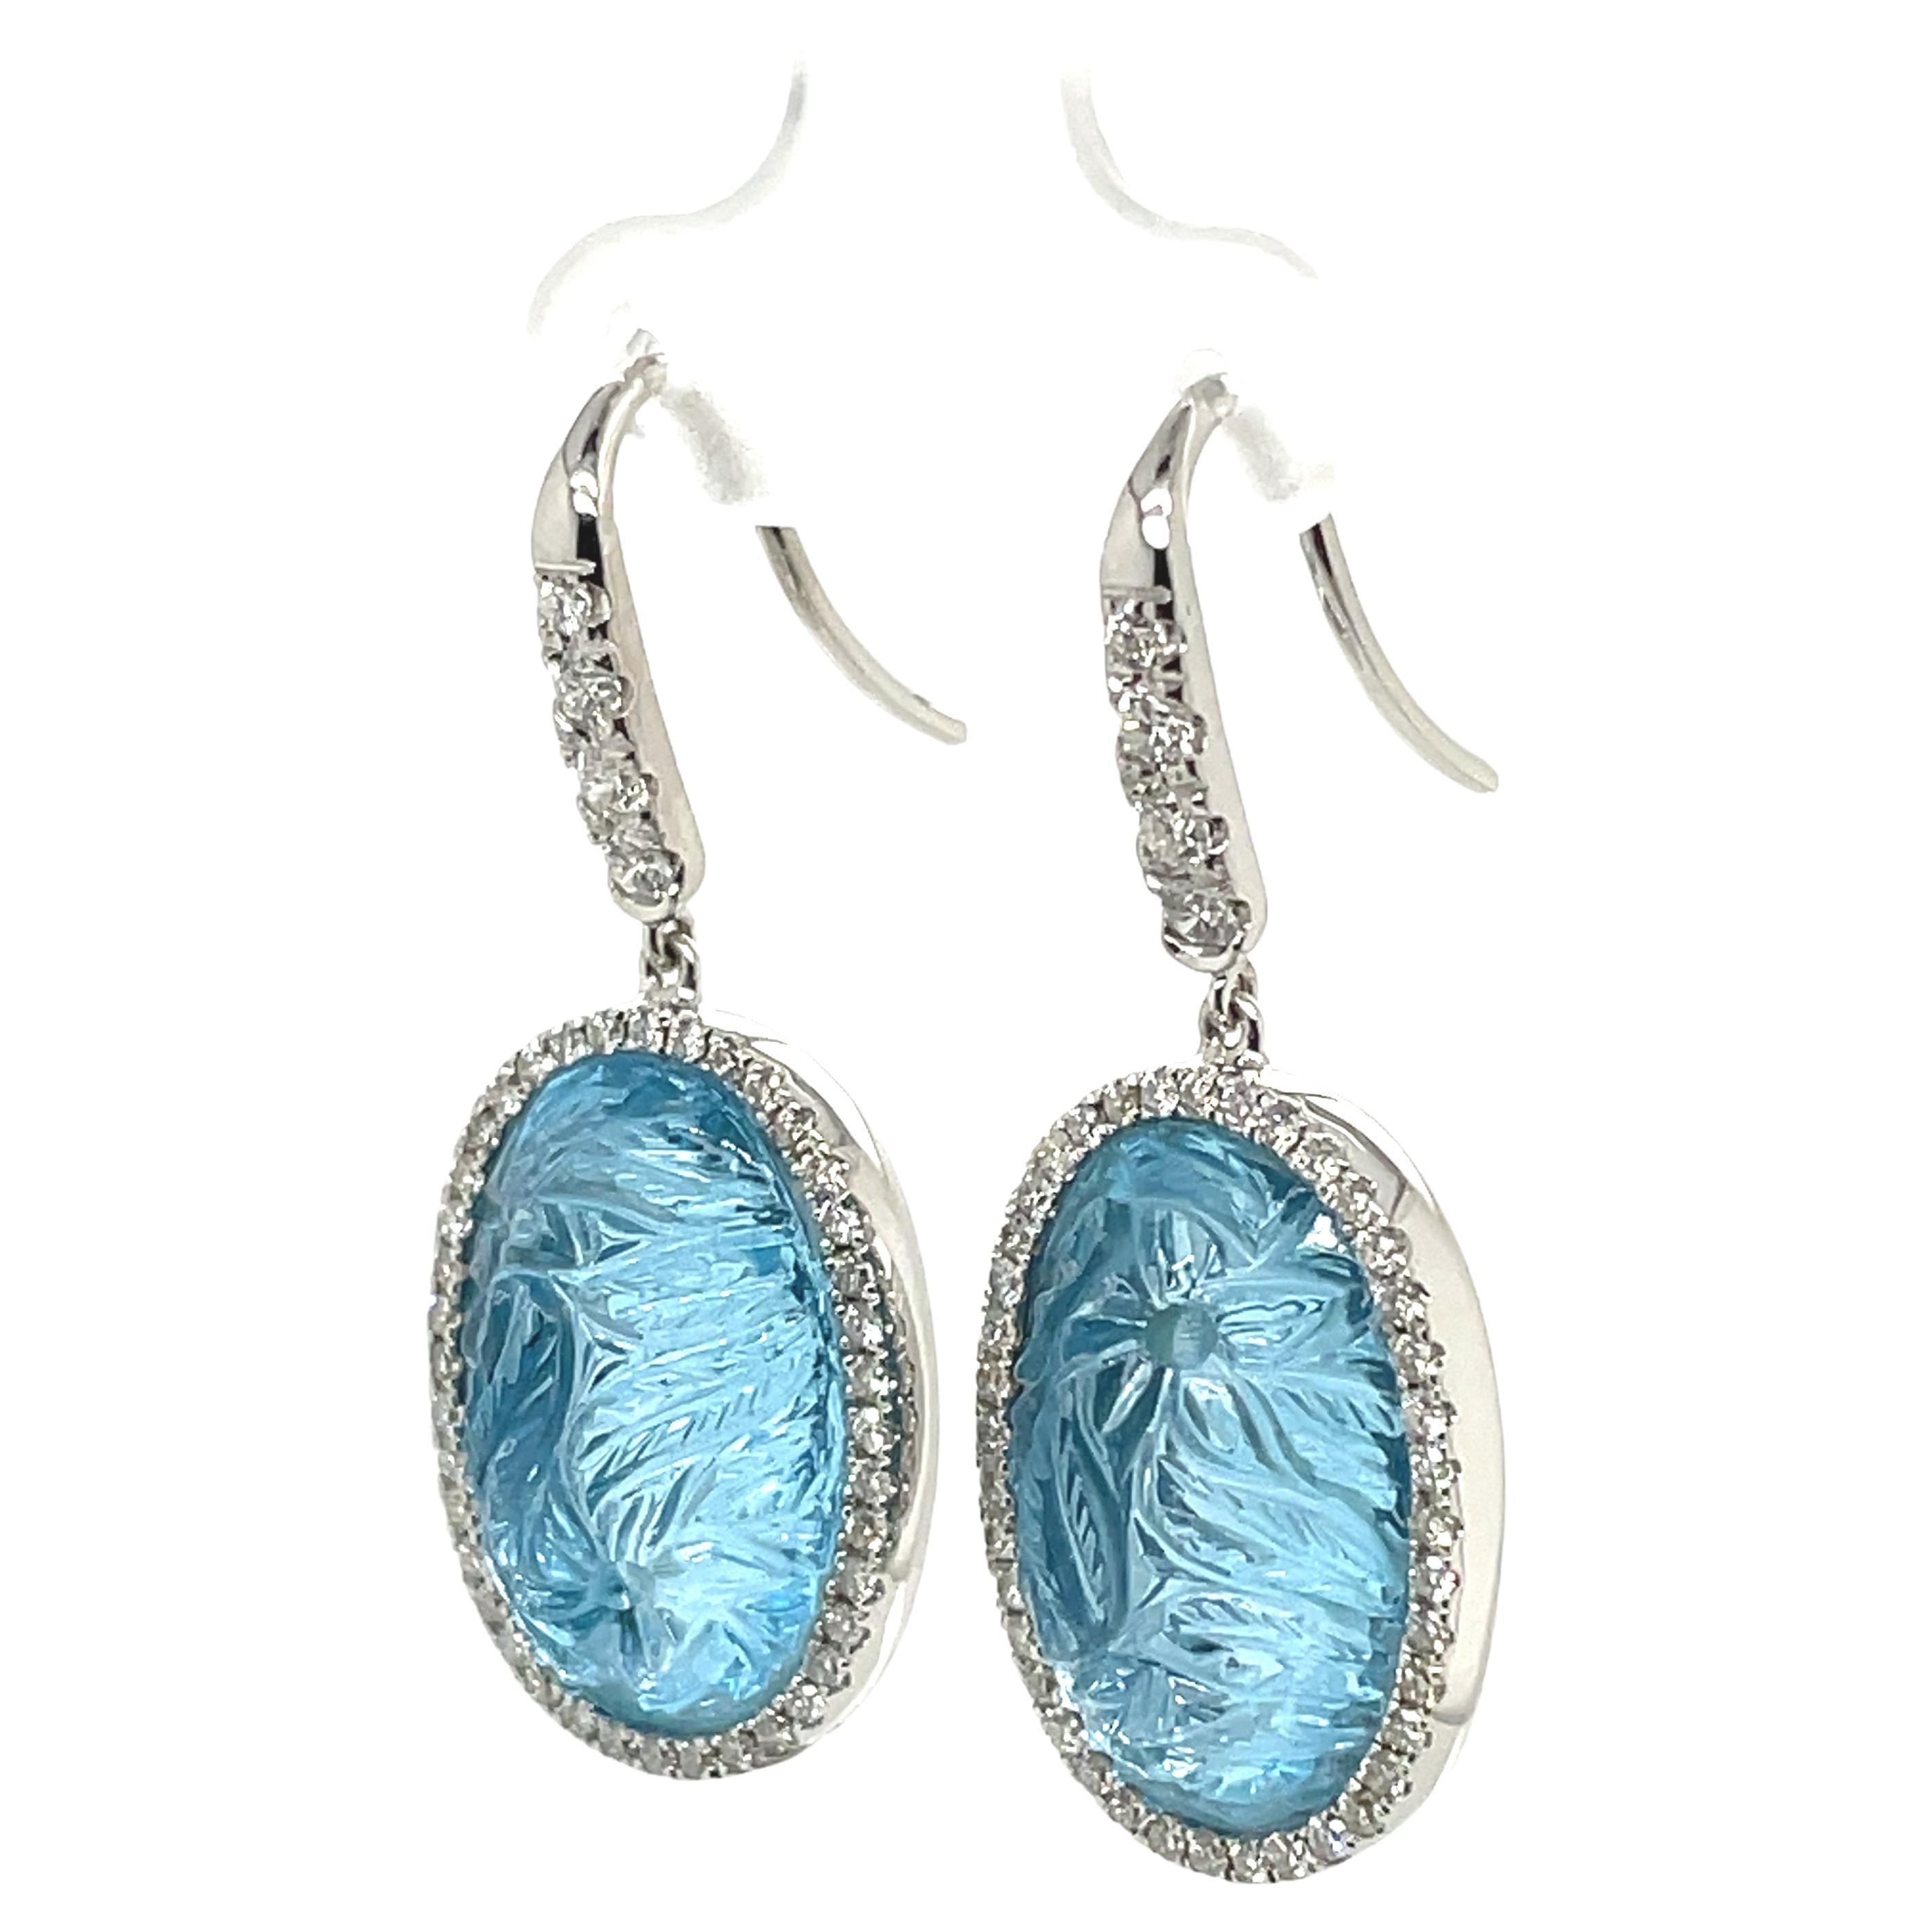 Explore the captivating color of this beautiful pair.

These earrings feature large blue topaz stones, totaling 27.41 cts. 

If you take a close look, you’ll notice that each blue topaz has intricate floral carvings.

Additionally, each earring is